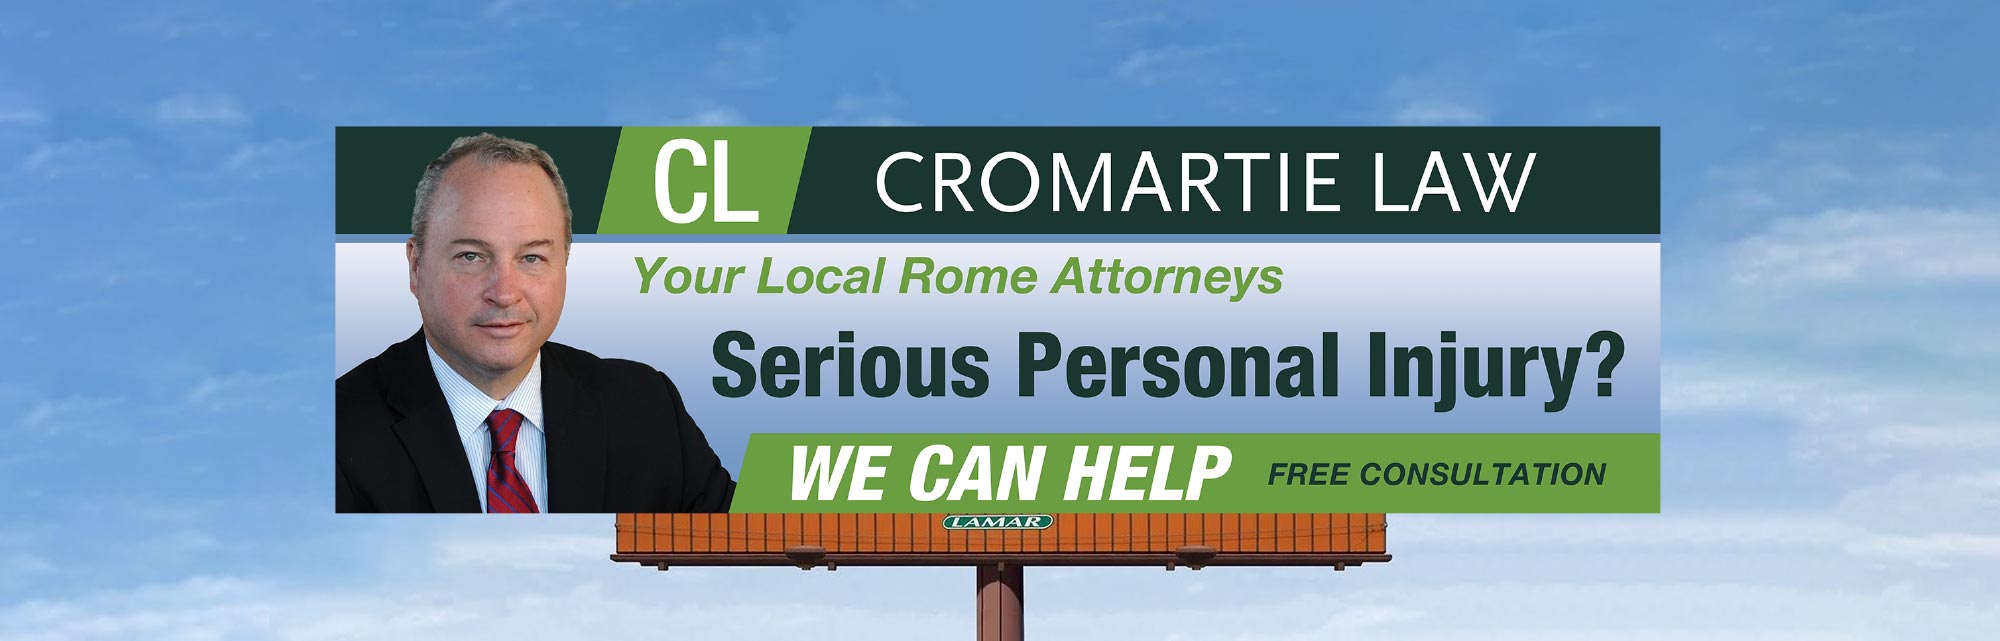 Cromartie Law Your Local Rome Attorneys. Car Wreck? We Can Help. Free Consultation.